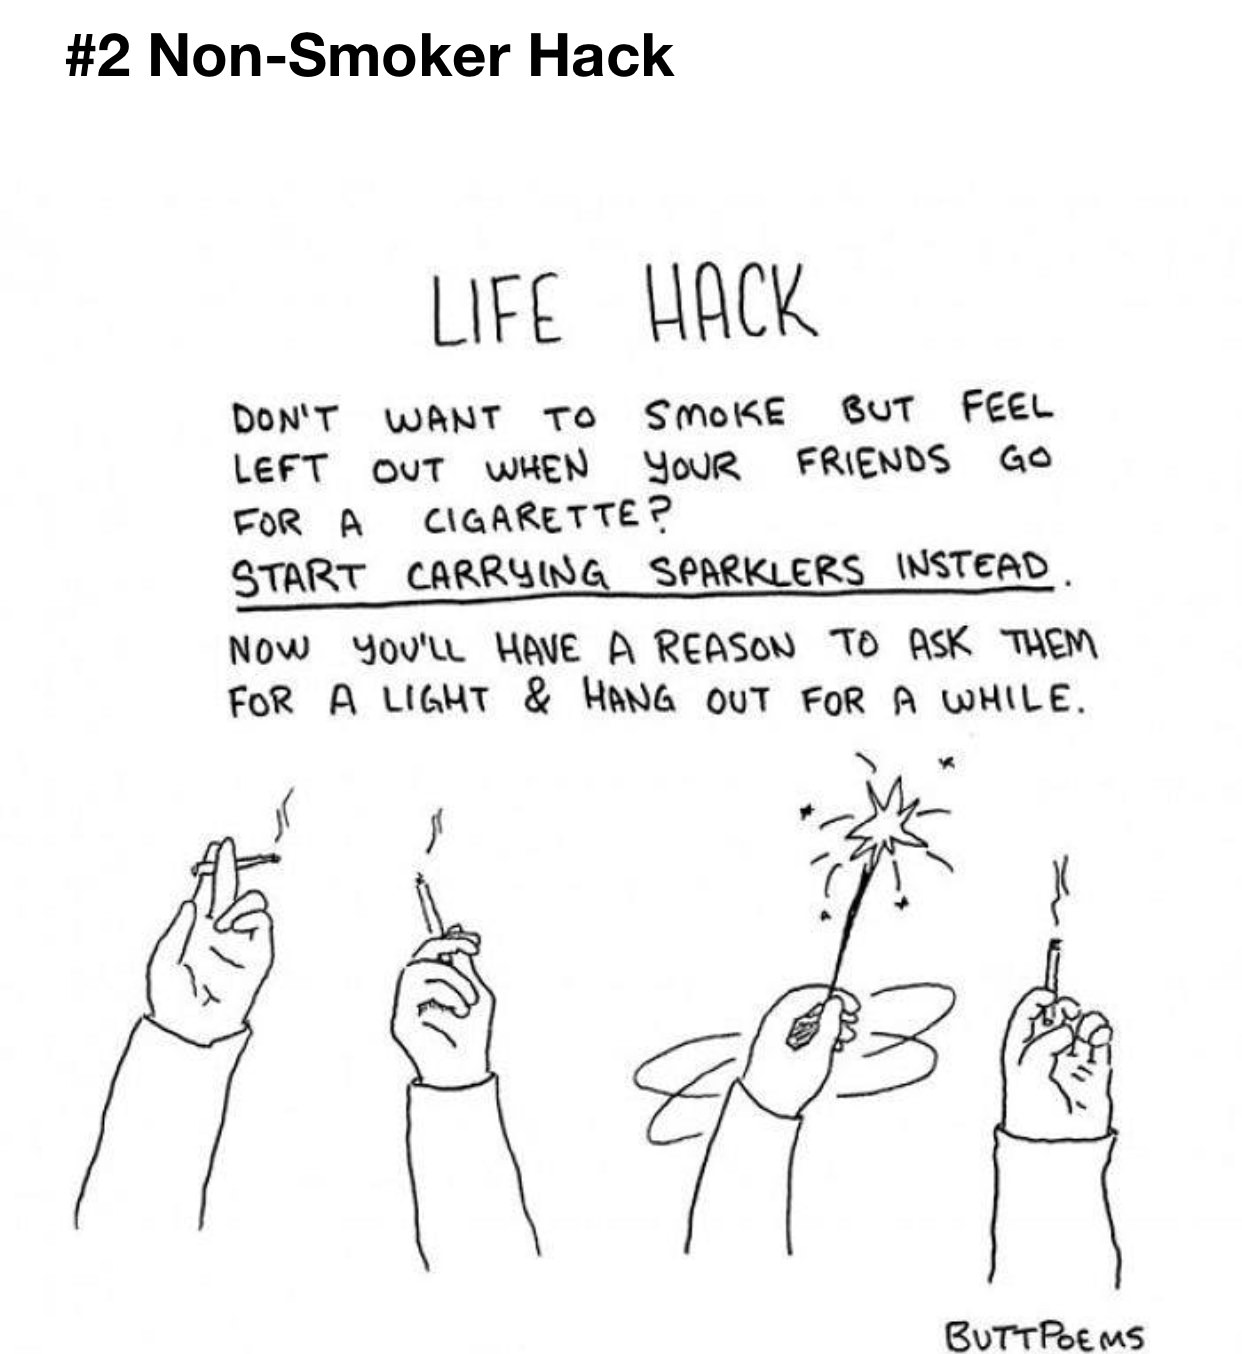 funny life tips meme - NonSmoker Hack Life Hack Don'T Want To Smoke But Feel Left Out When Your Friends Go For A Cigarette? Start Carrying Sparklers Instead Now You'Ll Have A Reason To Ask Them For A Light & Hang Out For A While. Butt Poems